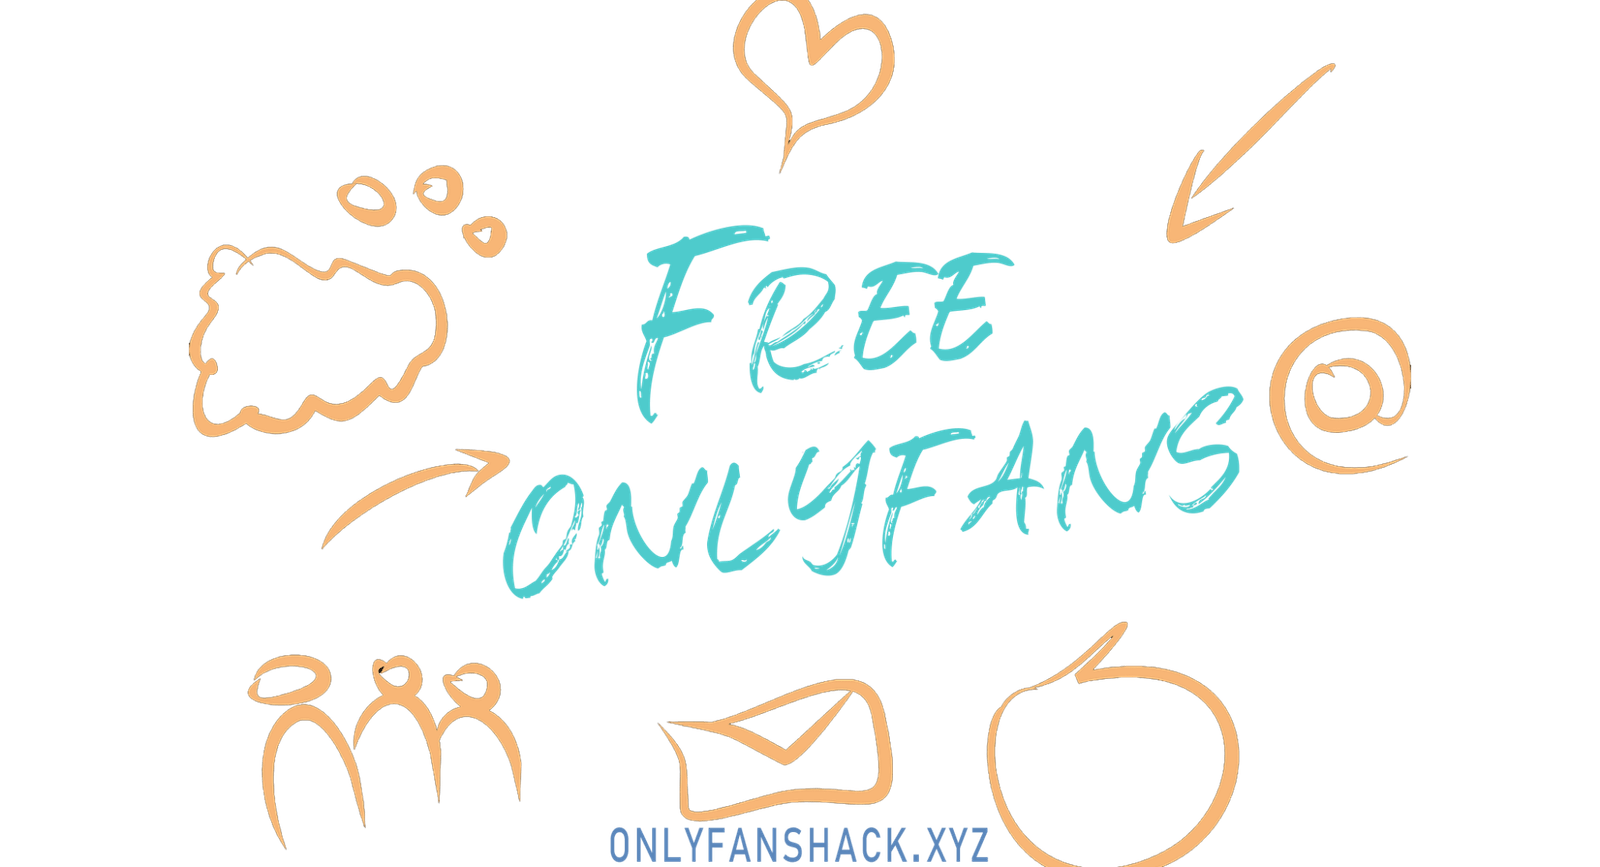 Only pages fans free Best OnlyFans